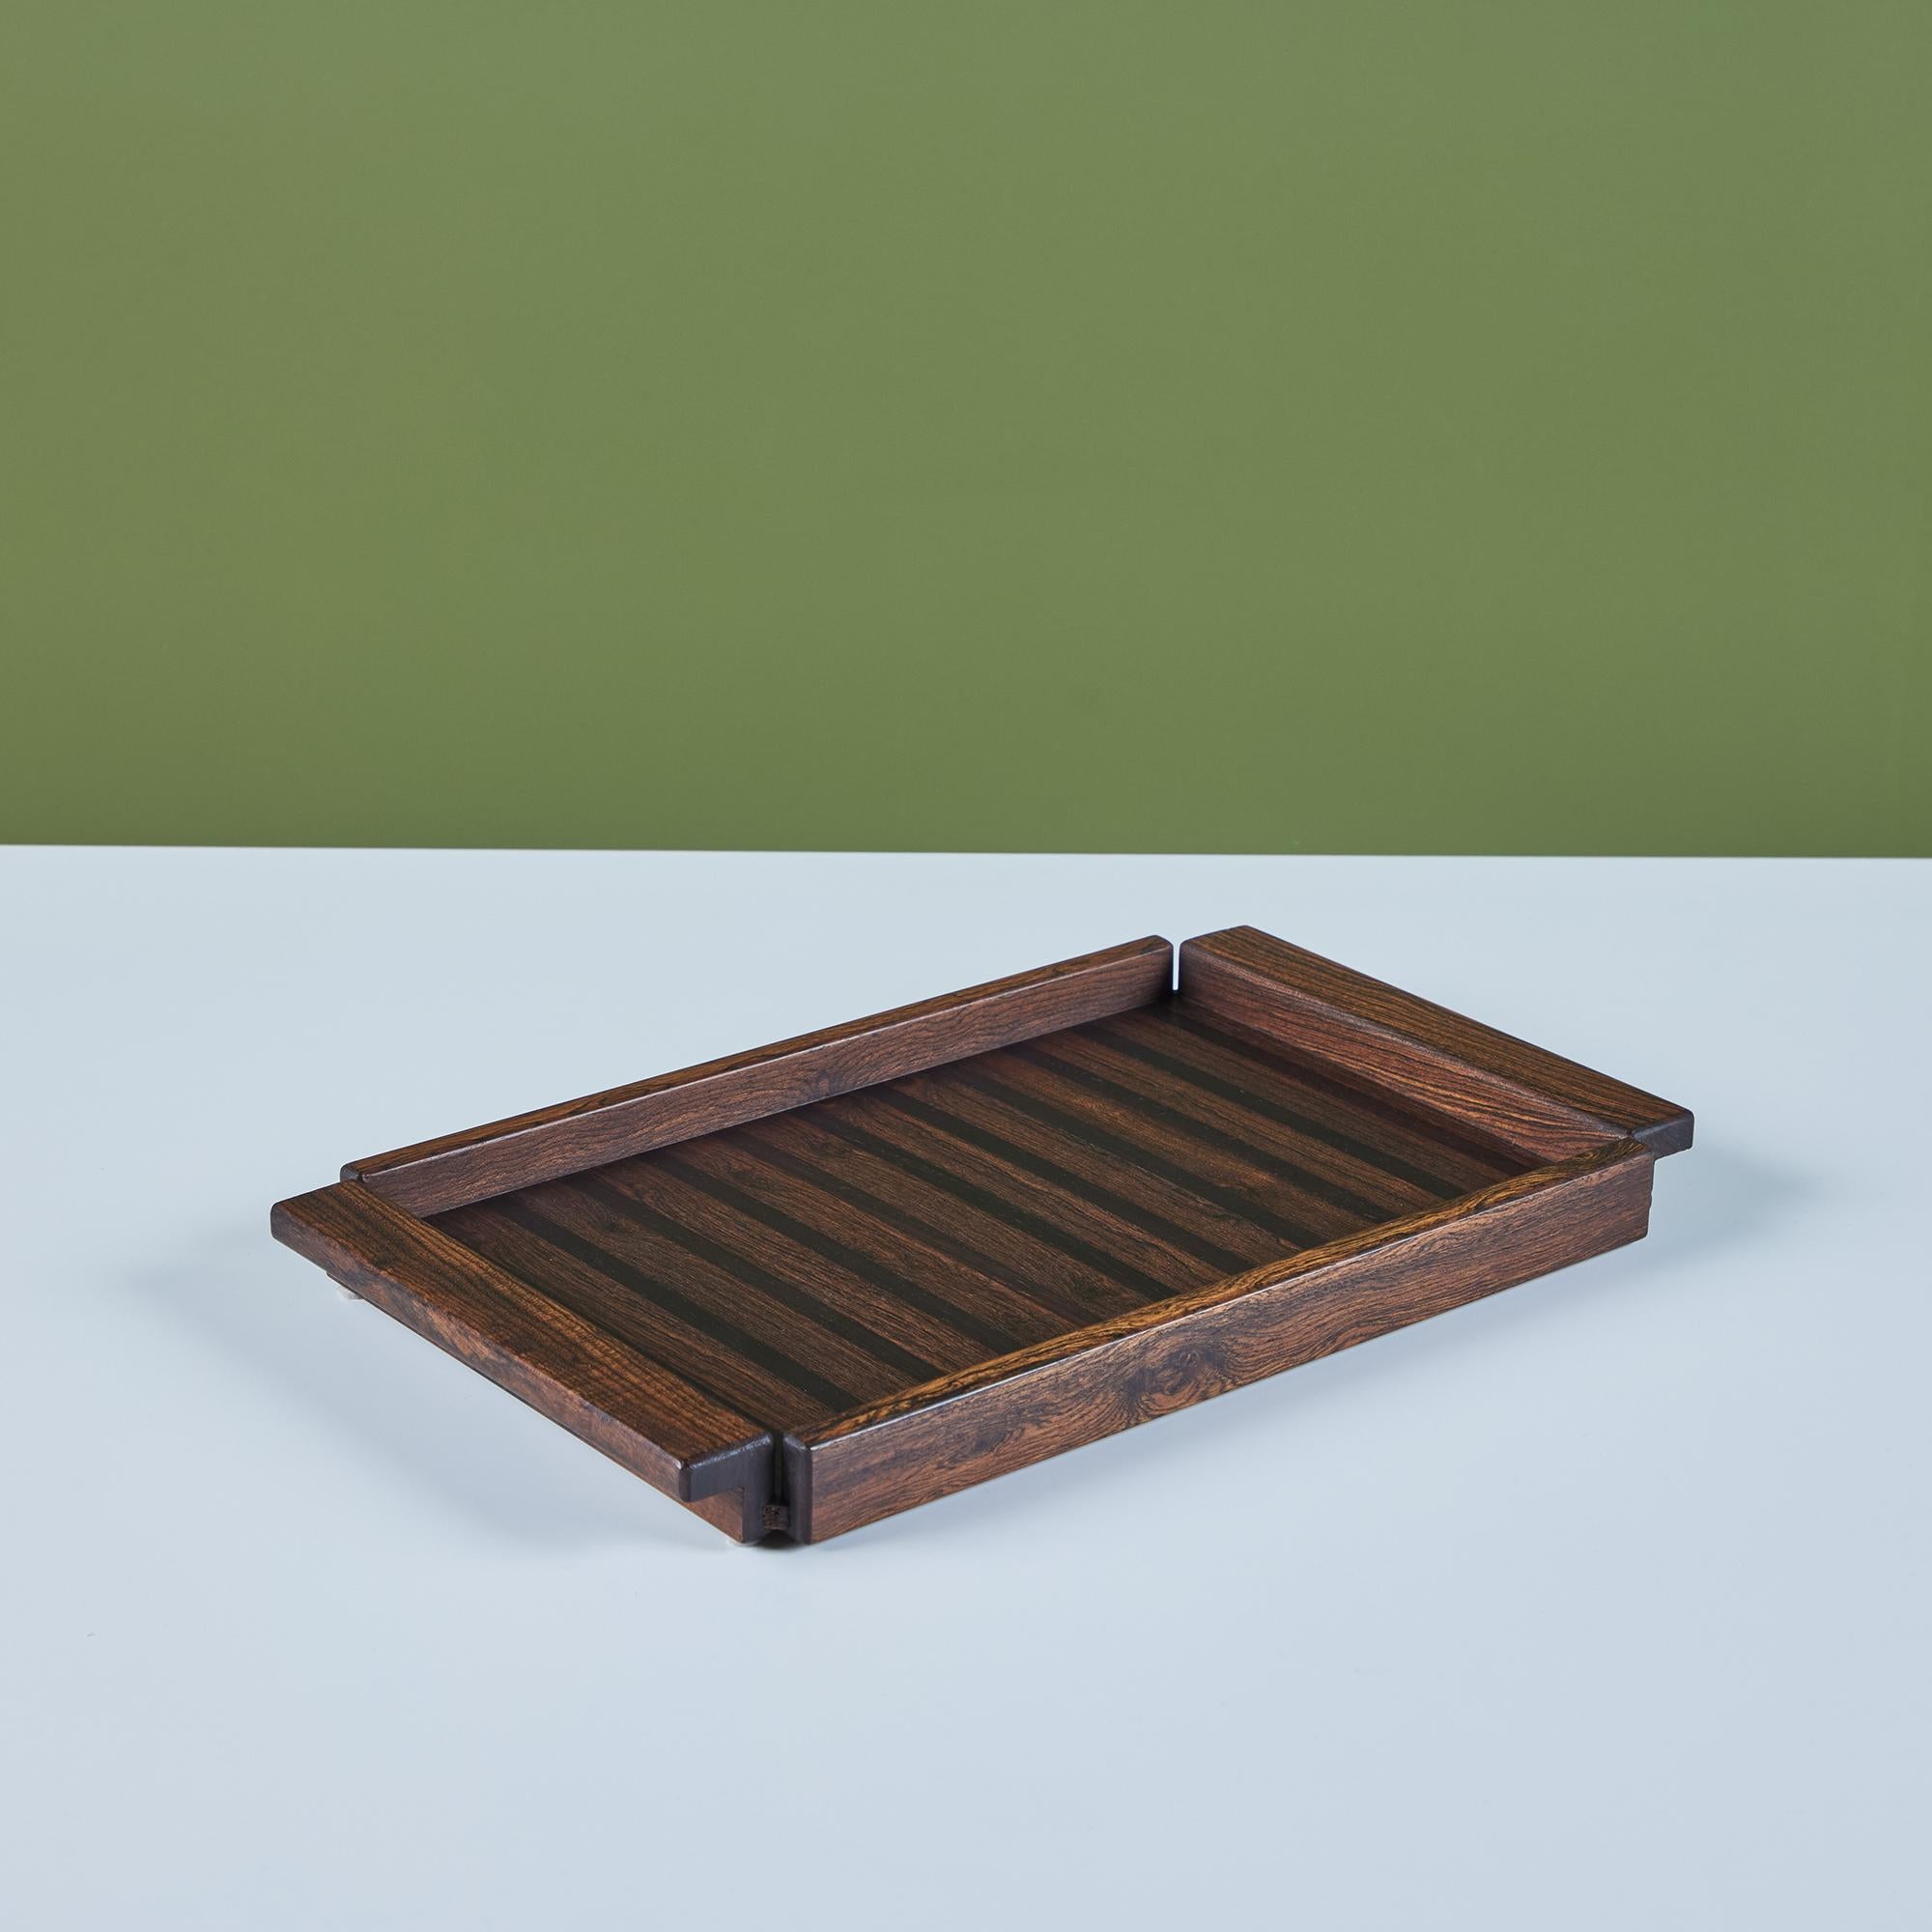 Cocobolo tray by Don Shoemaker for Señal, Mexico, c.1960s. The tray has a Cocobolo frame with integrated handles and features an inlaid striped pattern of rosewood.
Retains original manufacturer’s label on the underside.

CITES Notice: Due to